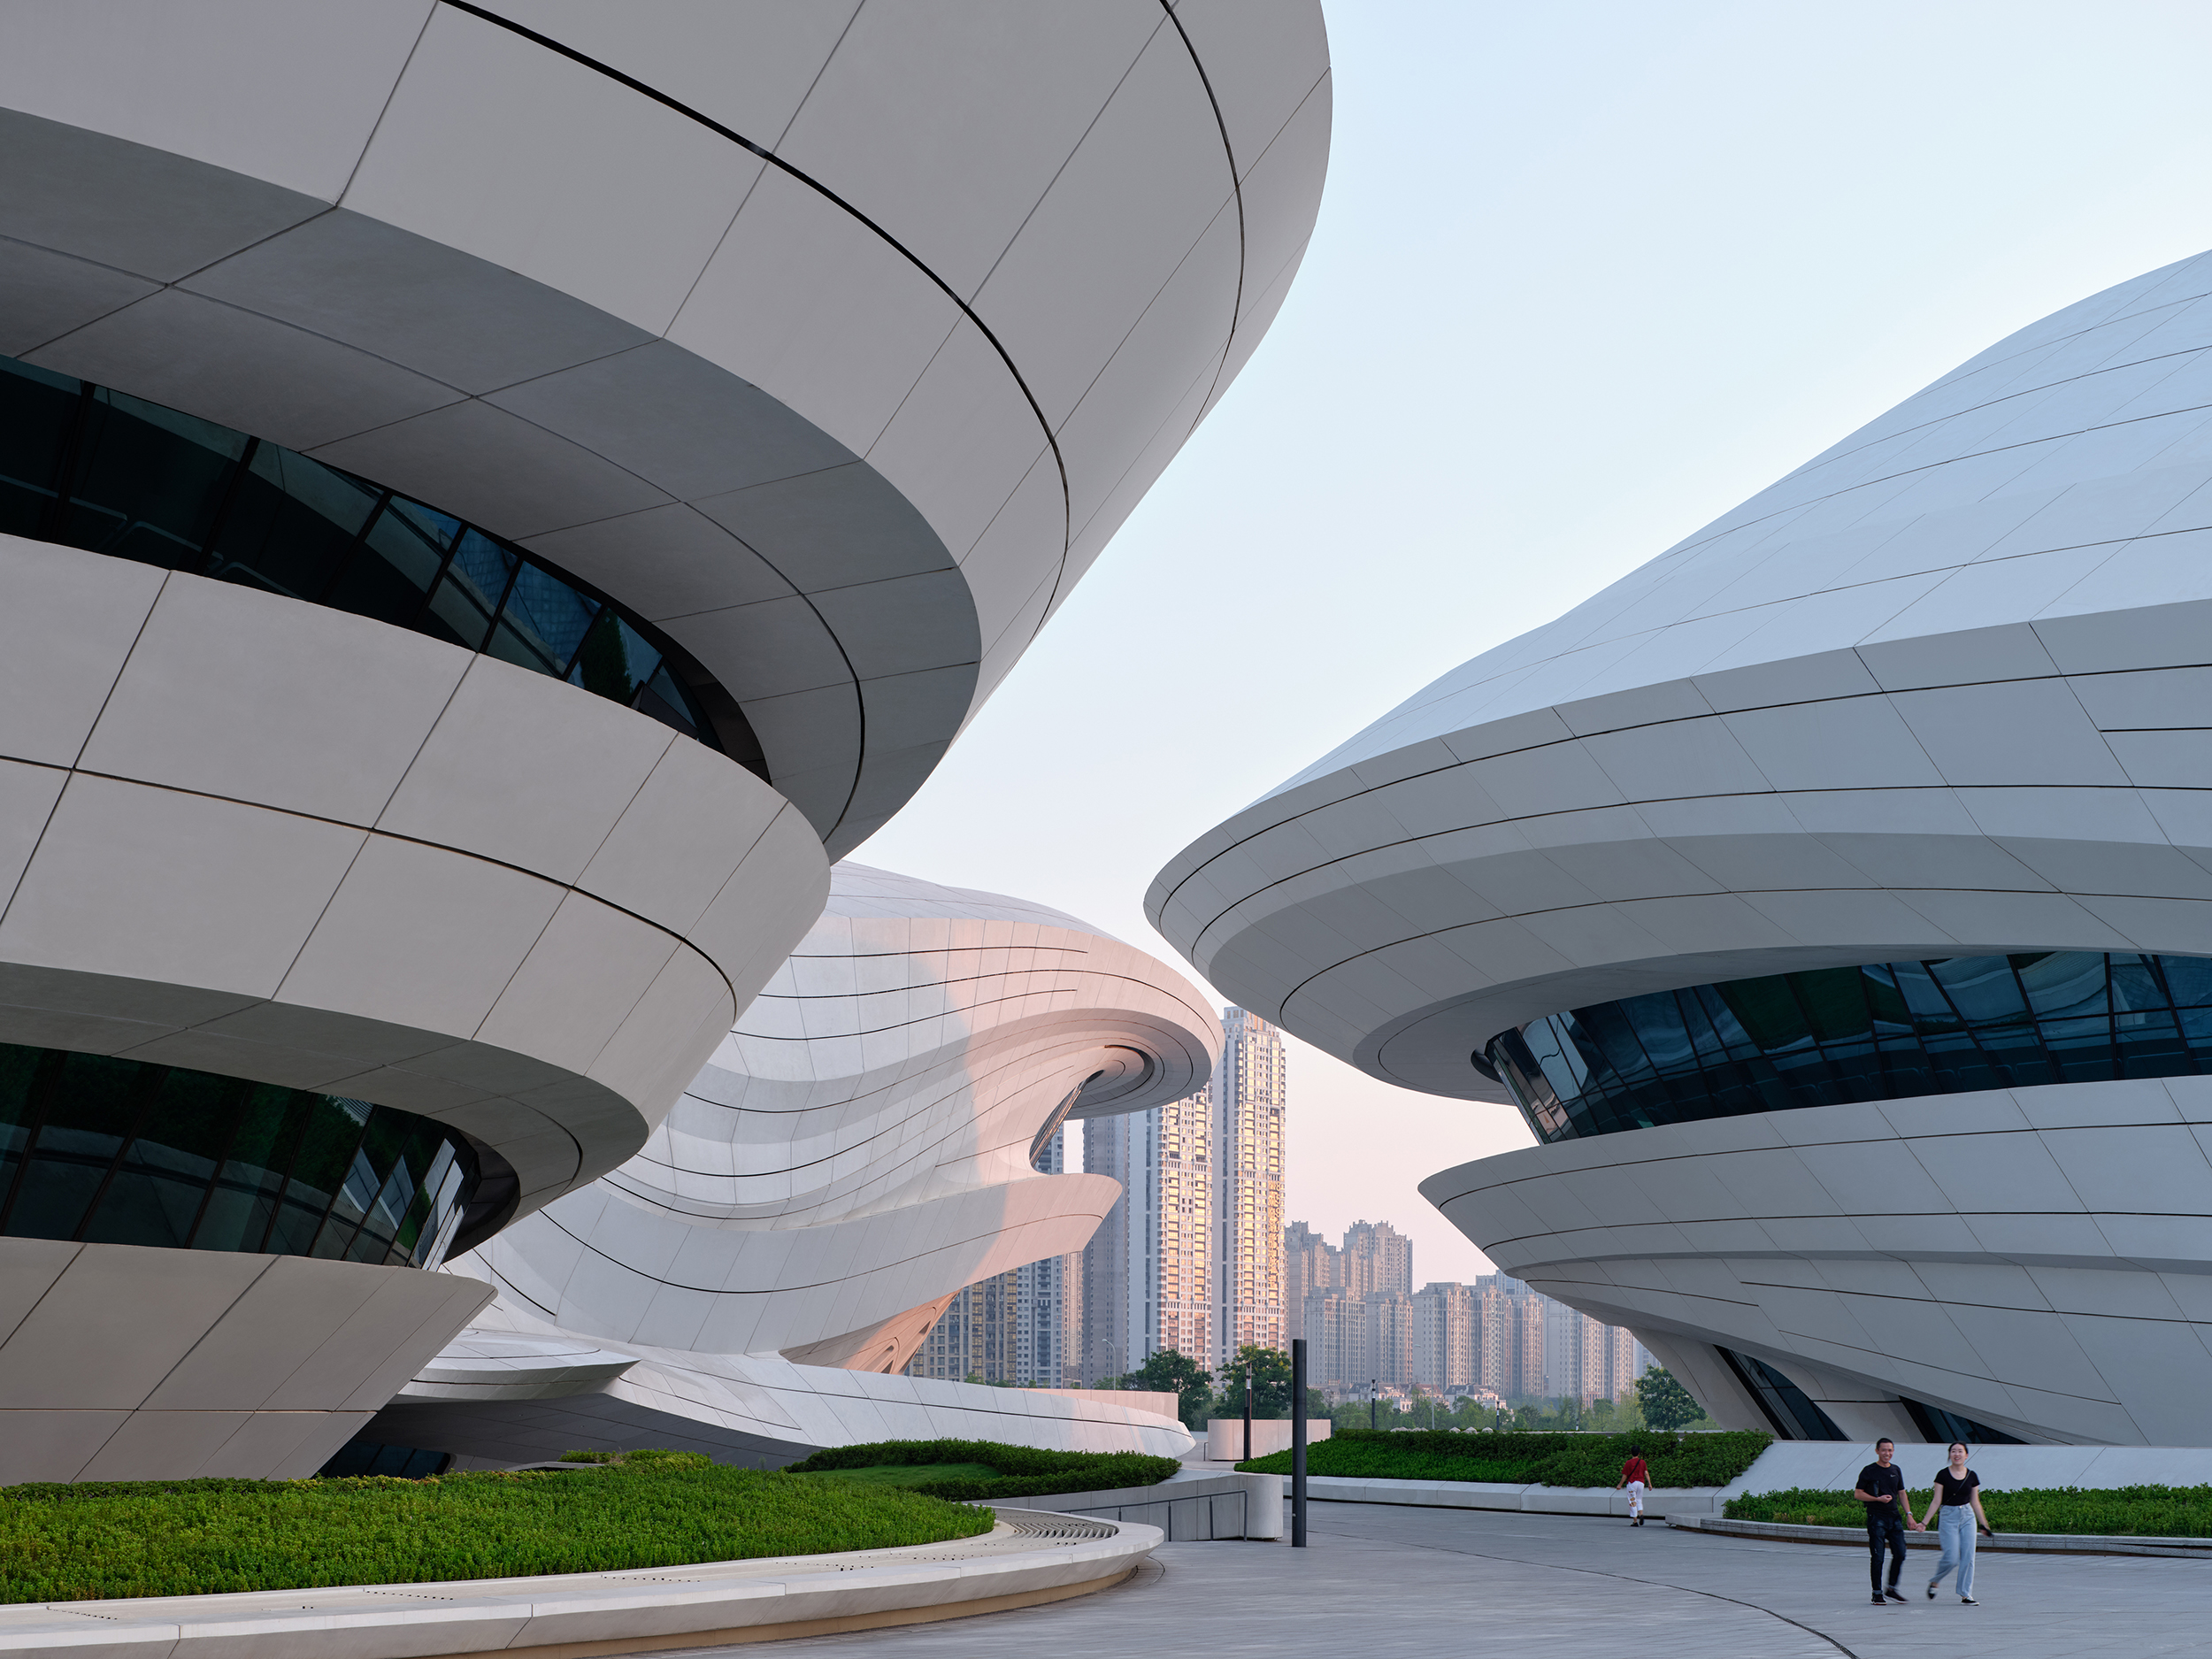 New China cultural Center by Zaha Hadid Architects - The Changsha Meixihu International Culture and Art Center